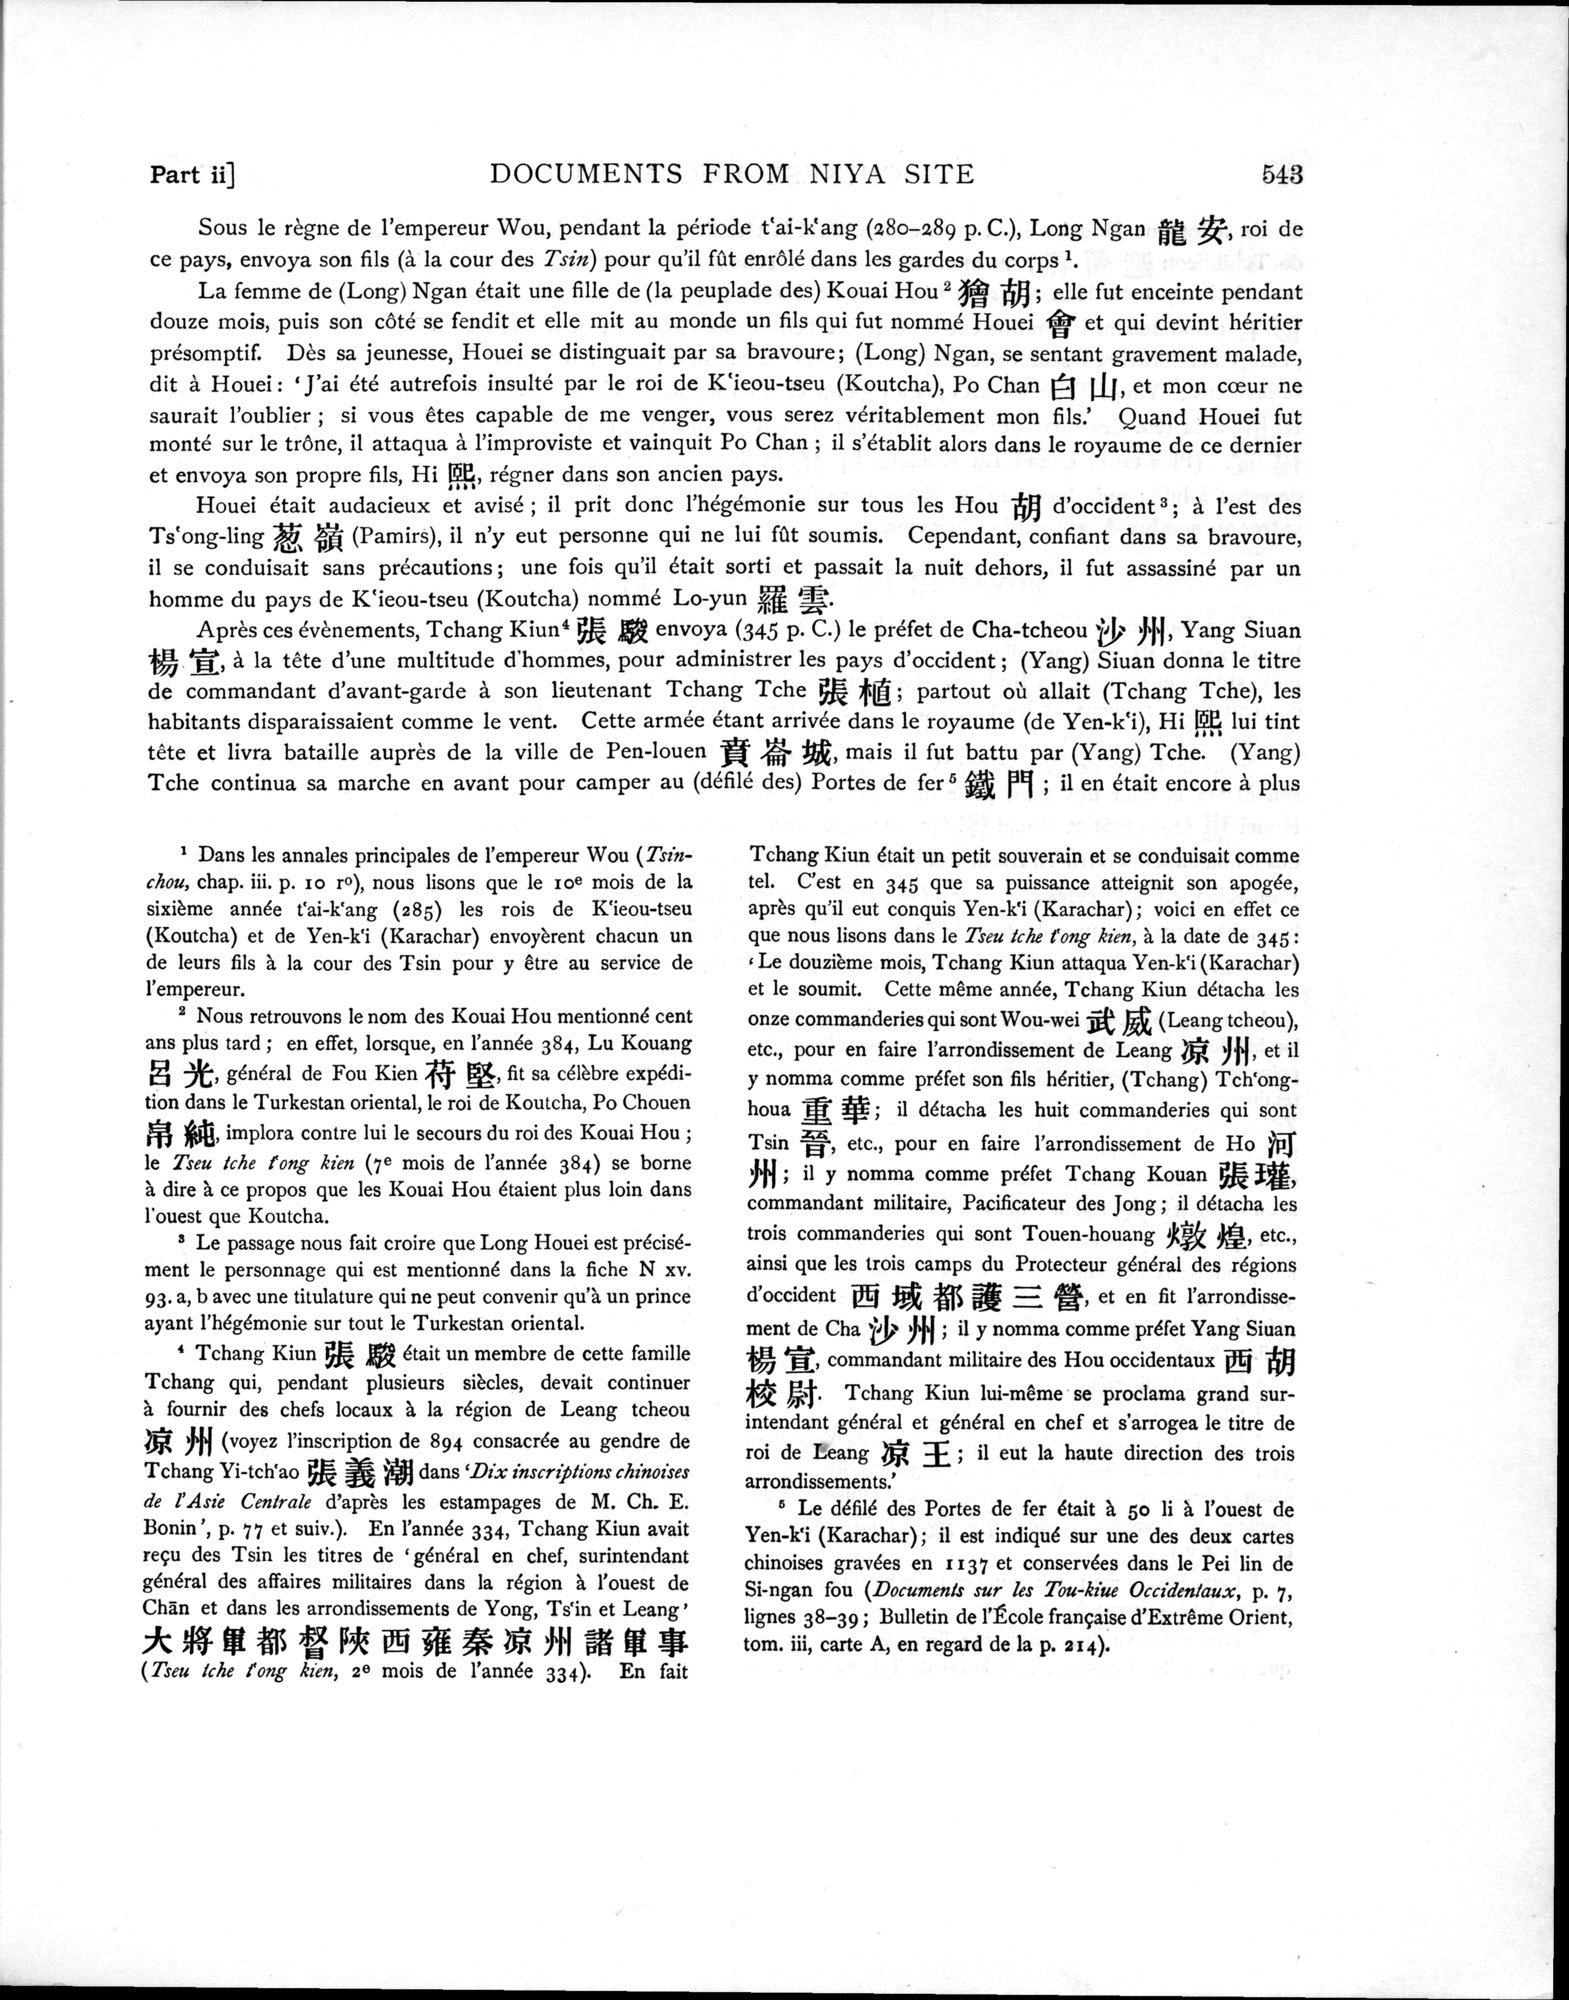 Ancient Khotan : vol.1 / Page 639 (Grayscale High Resolution Image)